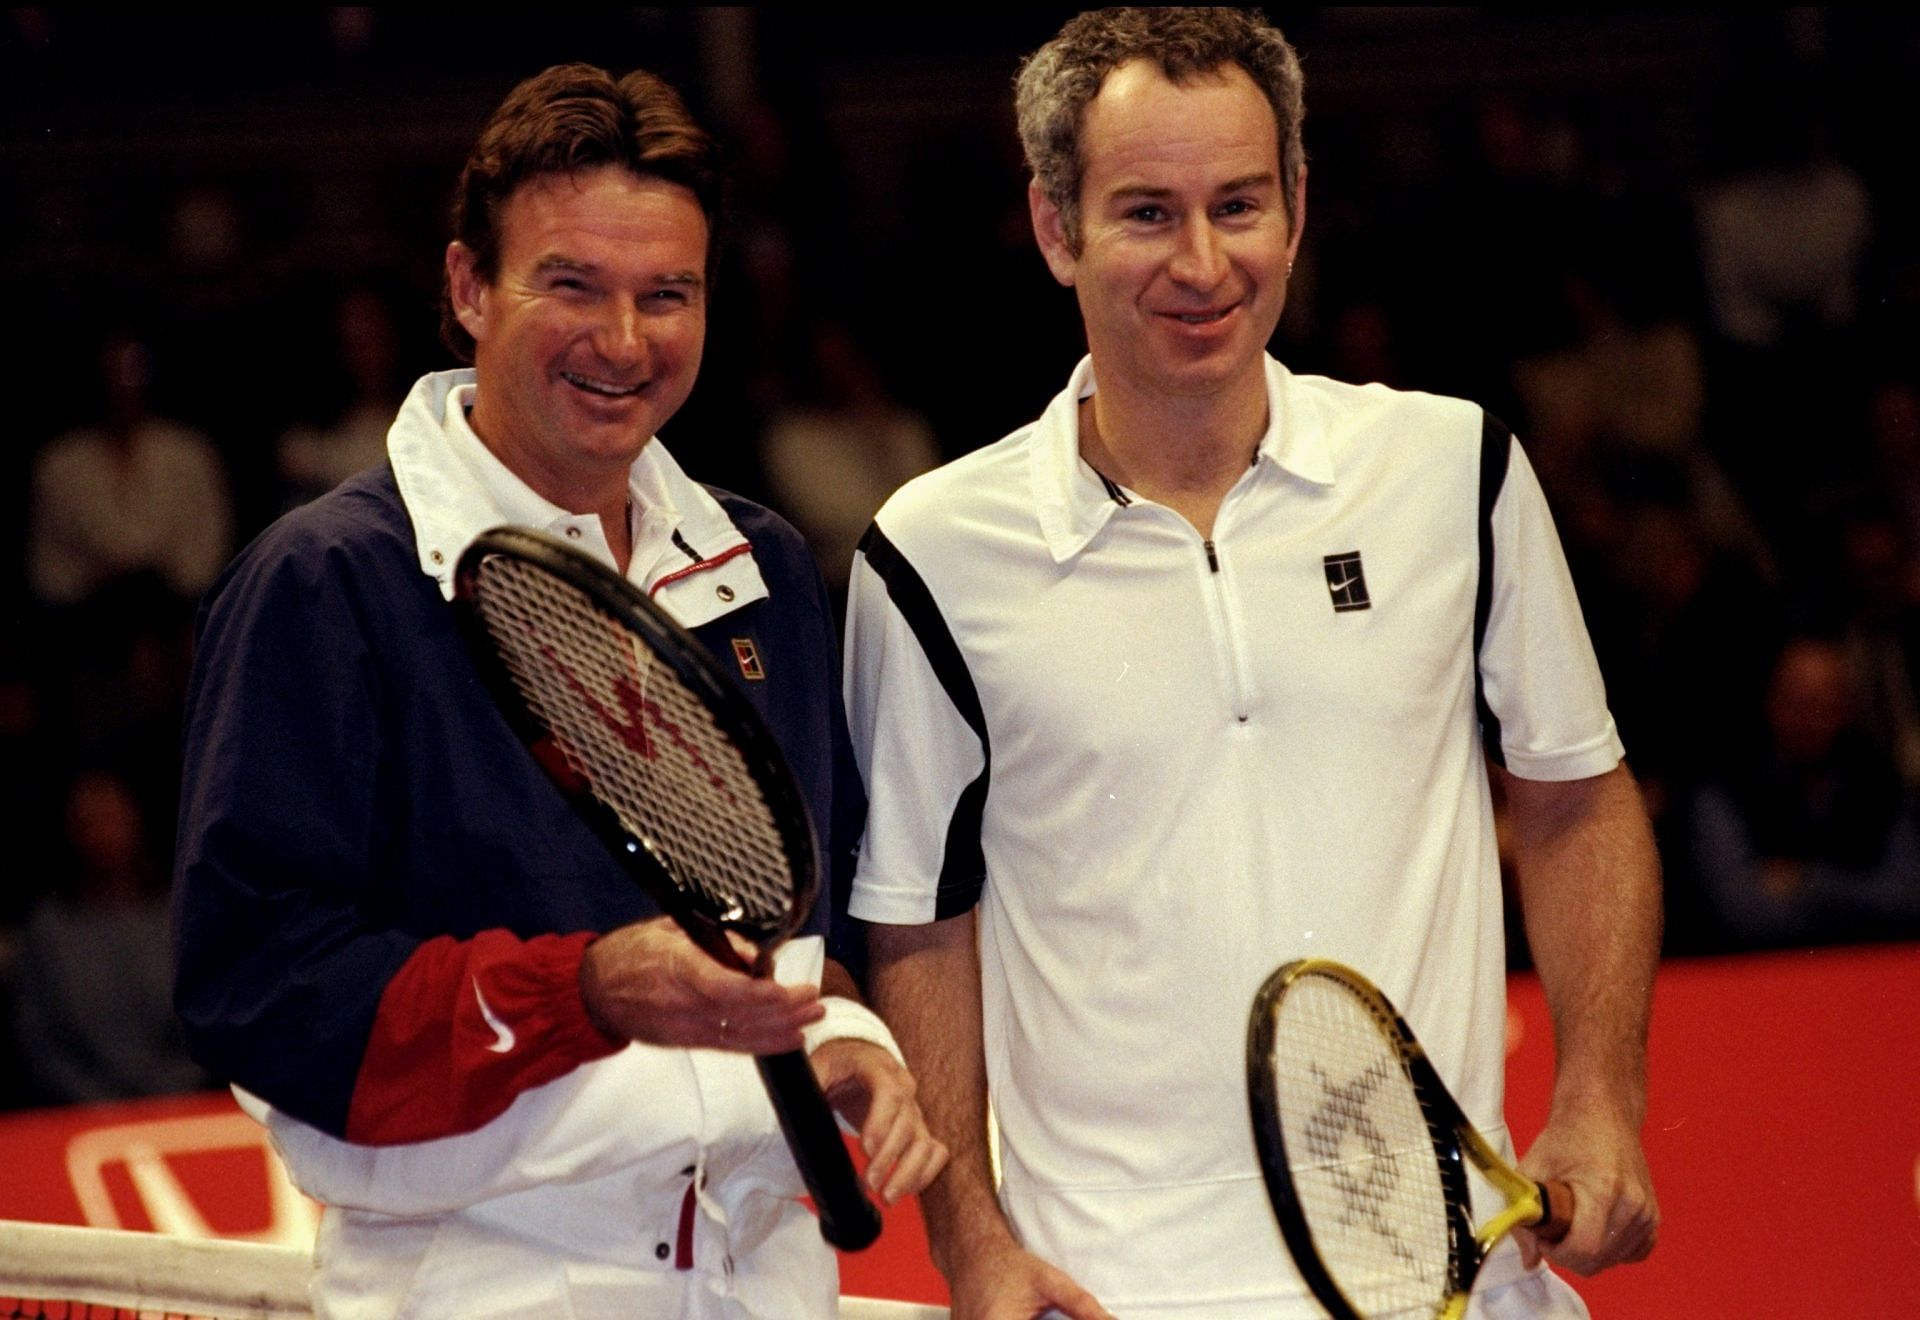 Jimmy Connors (L) and John McEnroe at the ATP Seniors Honda Challenge in London in 1999